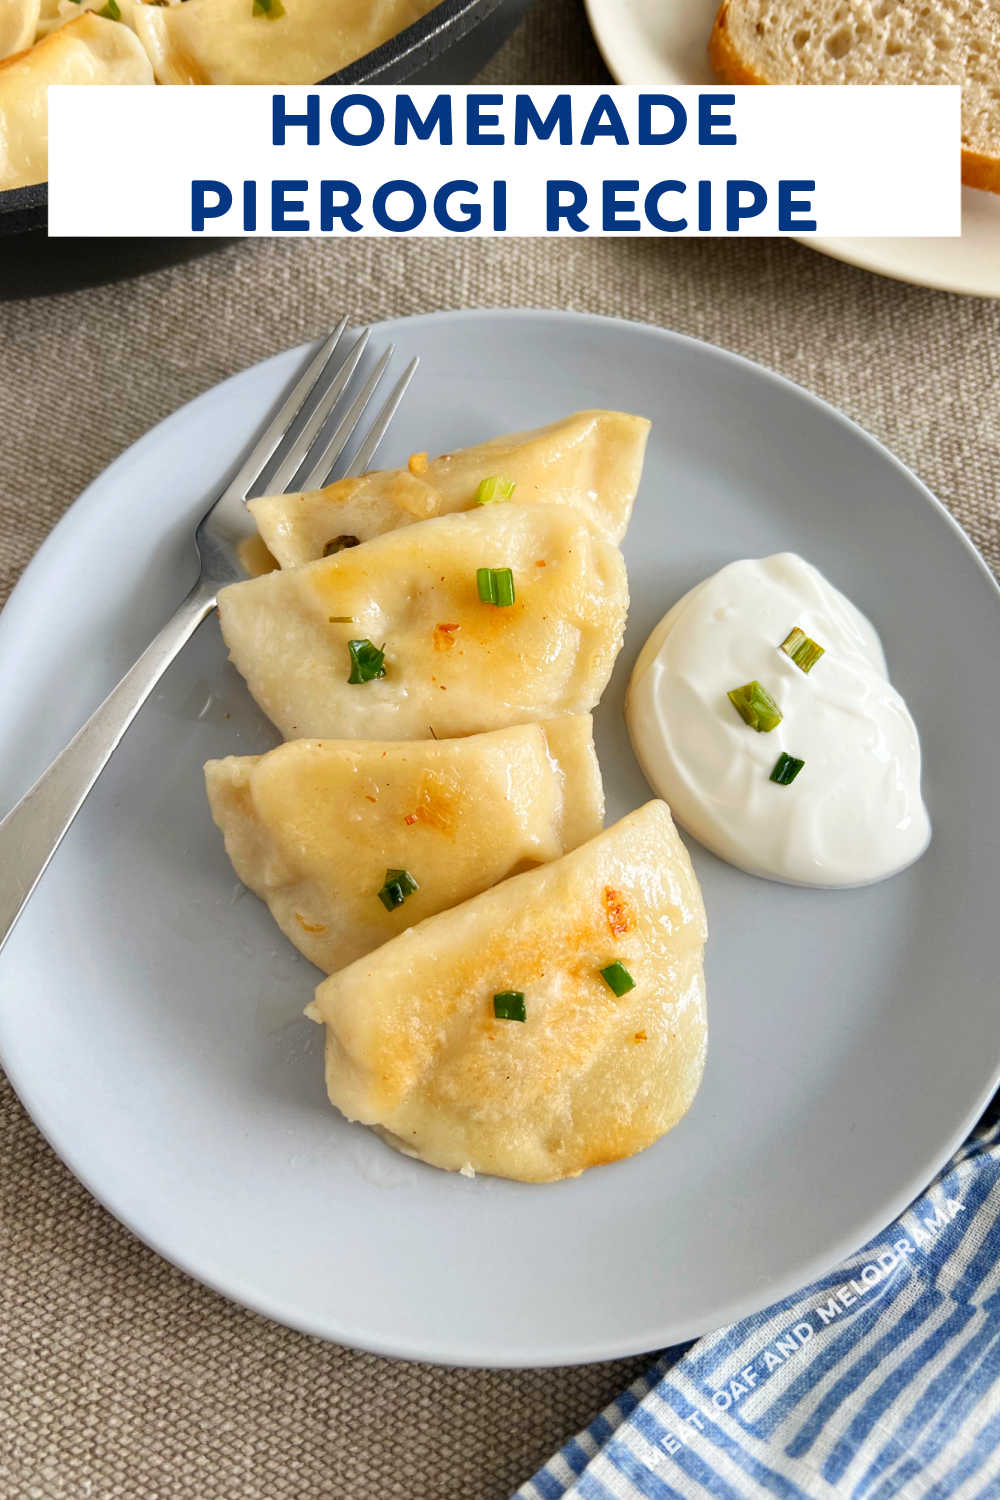 Homemade Cheddar Potato Pierogi is my grandma's pierogi recipe for boiled cheesy potato dumplings fried in butter and caramelized onions. The BEST pierogi!  Make them for Christmas, Lent or anytime you're craving authentic pierogi! via @meamel